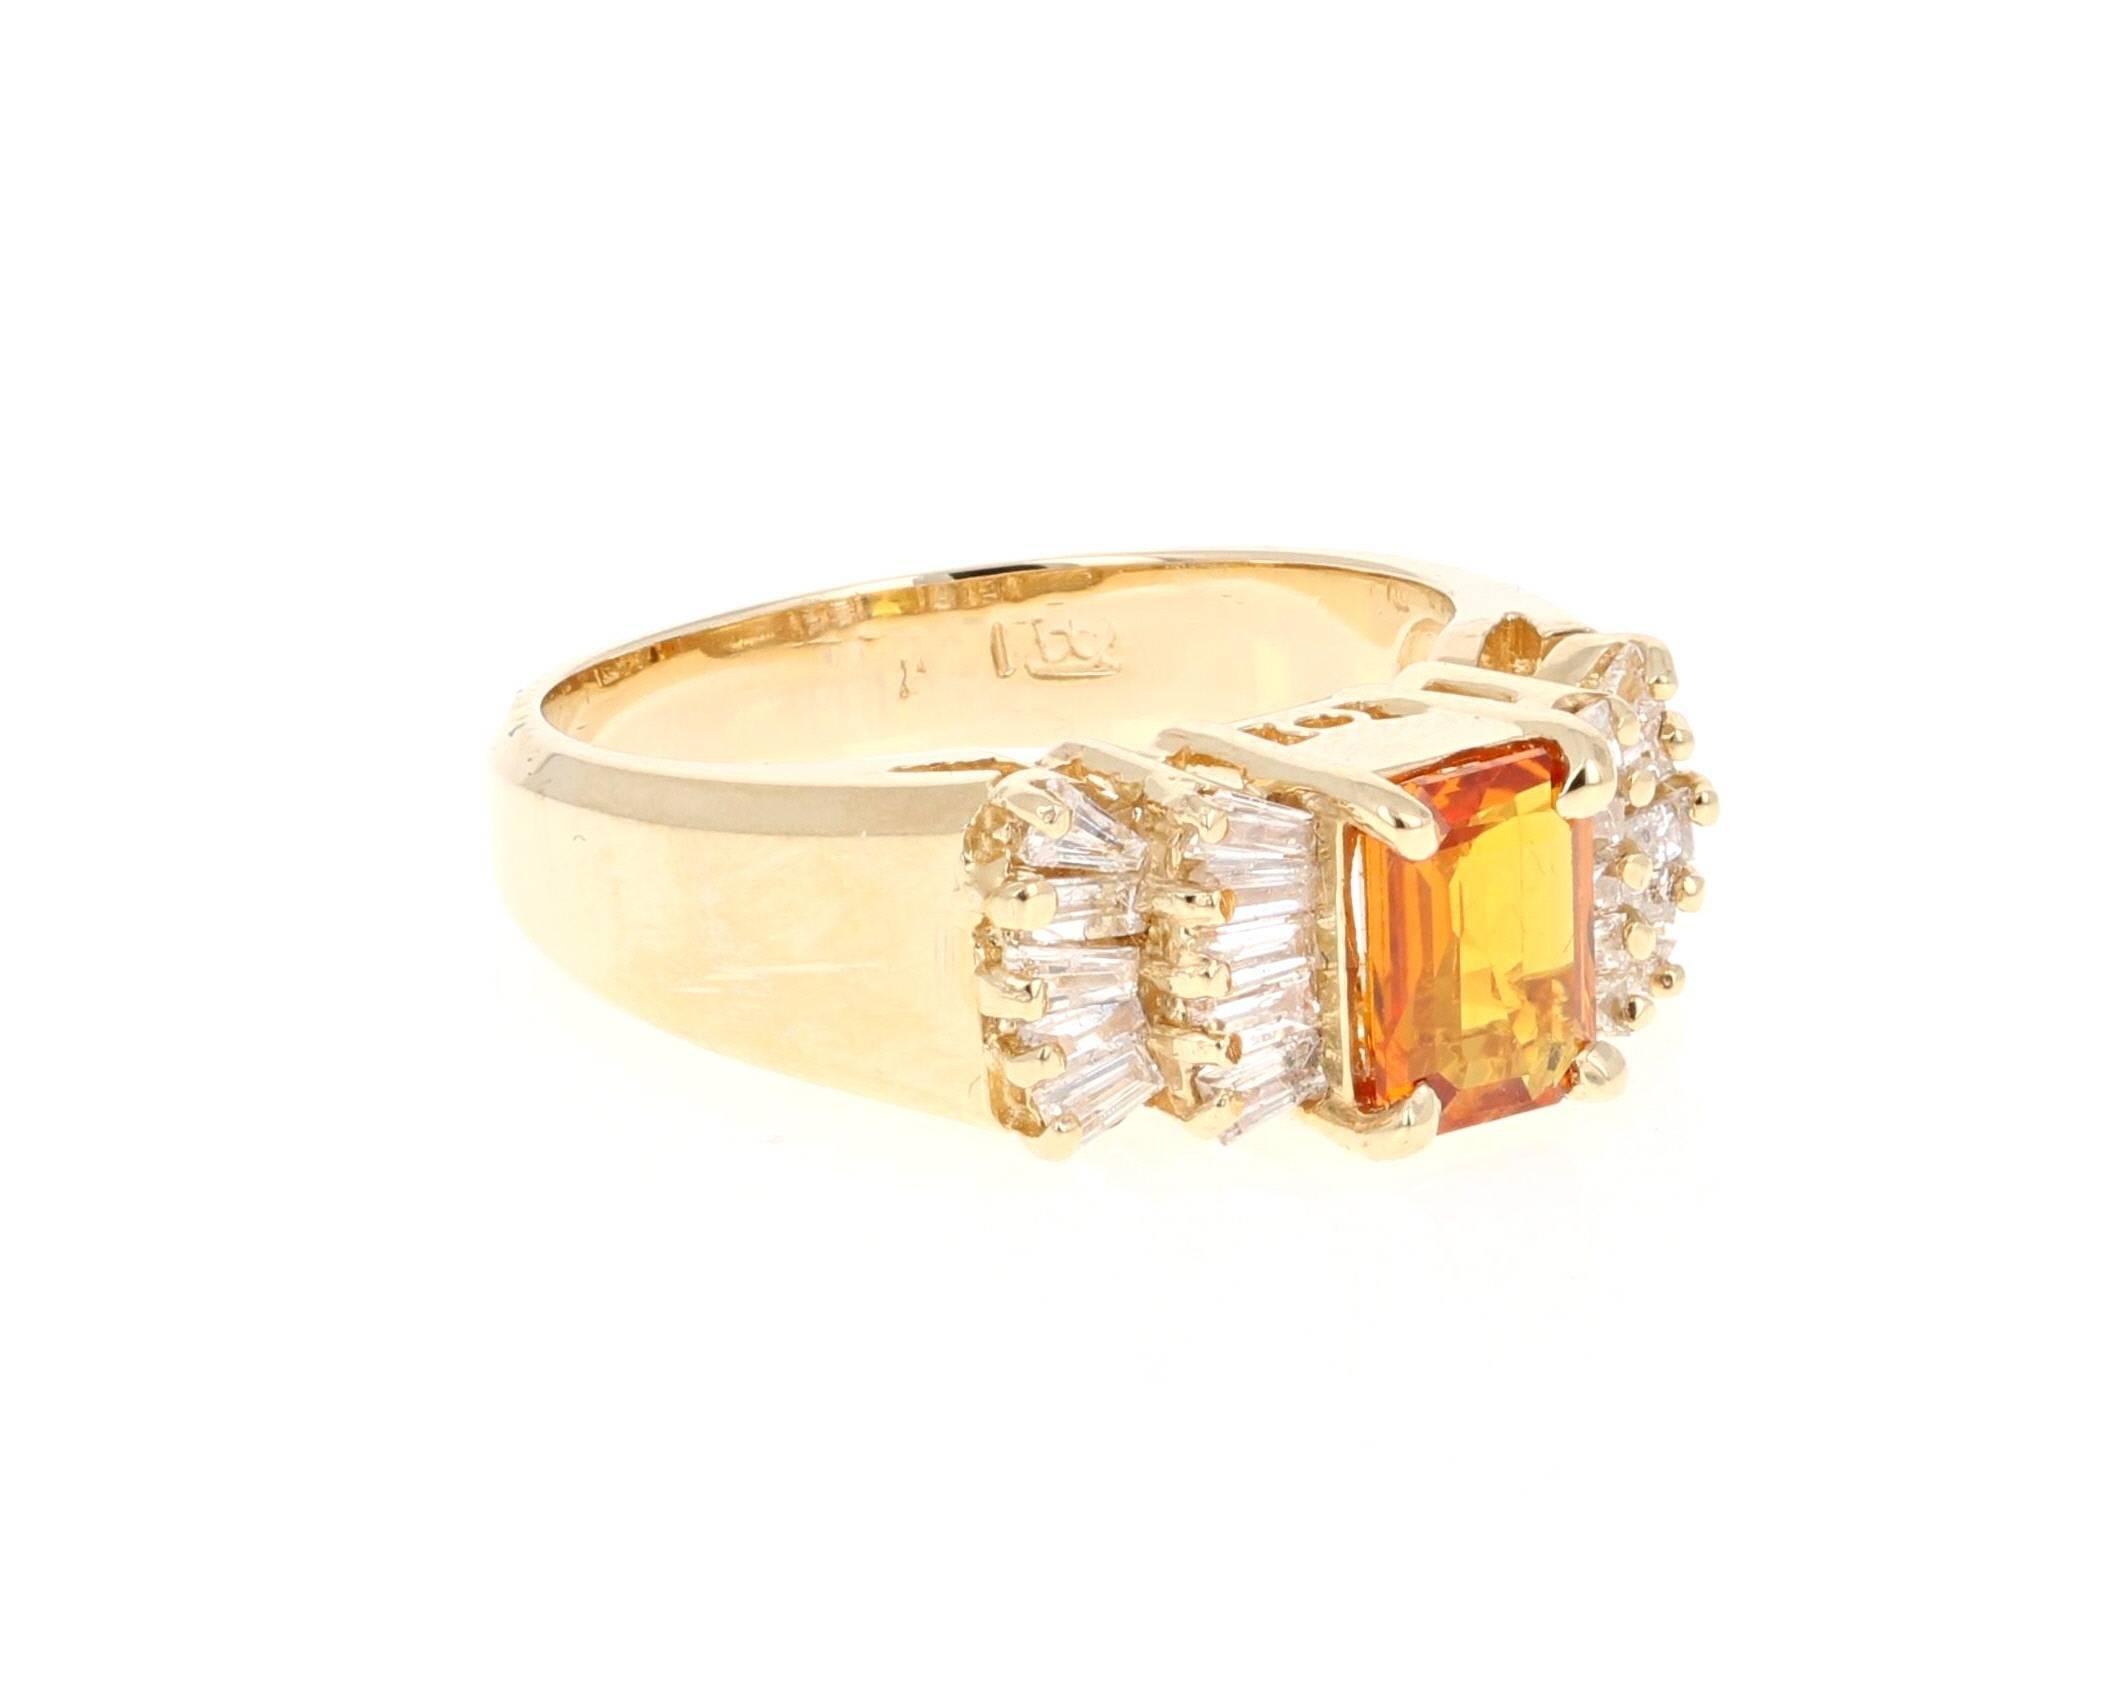 A gorgeous Orange Sapphire and Diamond Ring set in Yellow Gold. It can be the most beautiful and unique Engagement Ring. 
The Emerald Cut Orange Sapphire is 1.22 carats and is surrounded by 20 Baguette Cut Diamonds weighing 0.56 Carats. The total